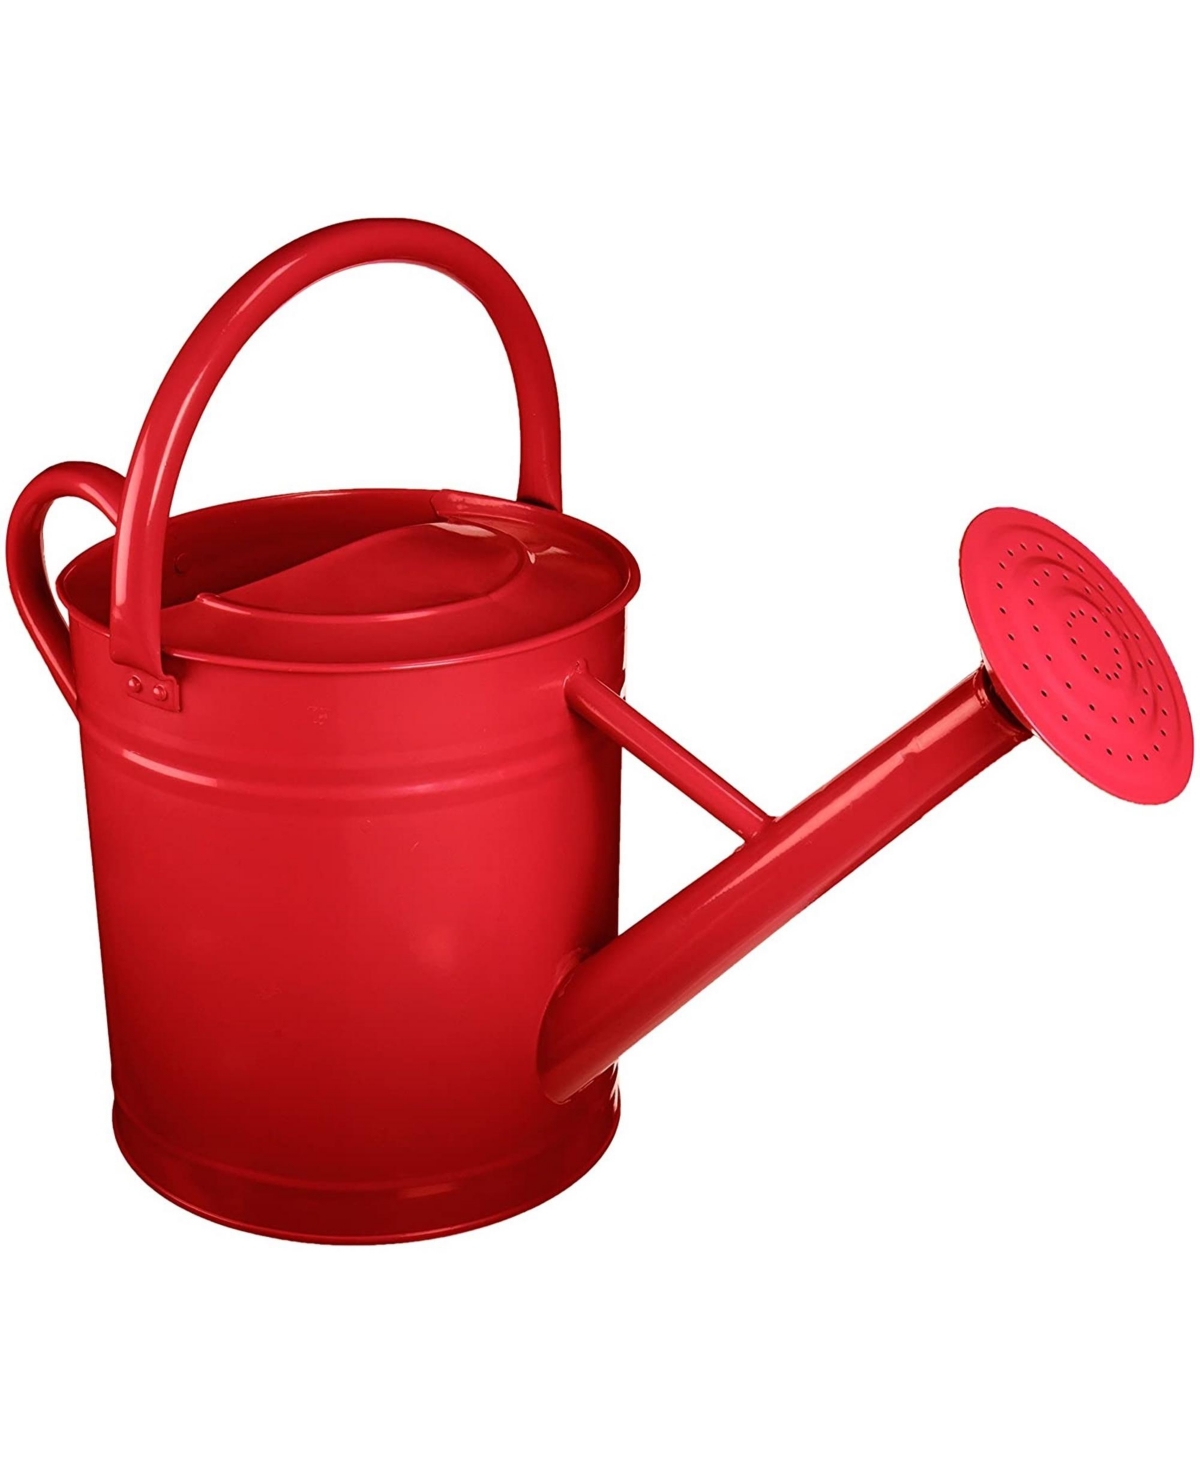 Gardener Select Metal Watering Can, Red, 1.85 Gallons 7L - Red